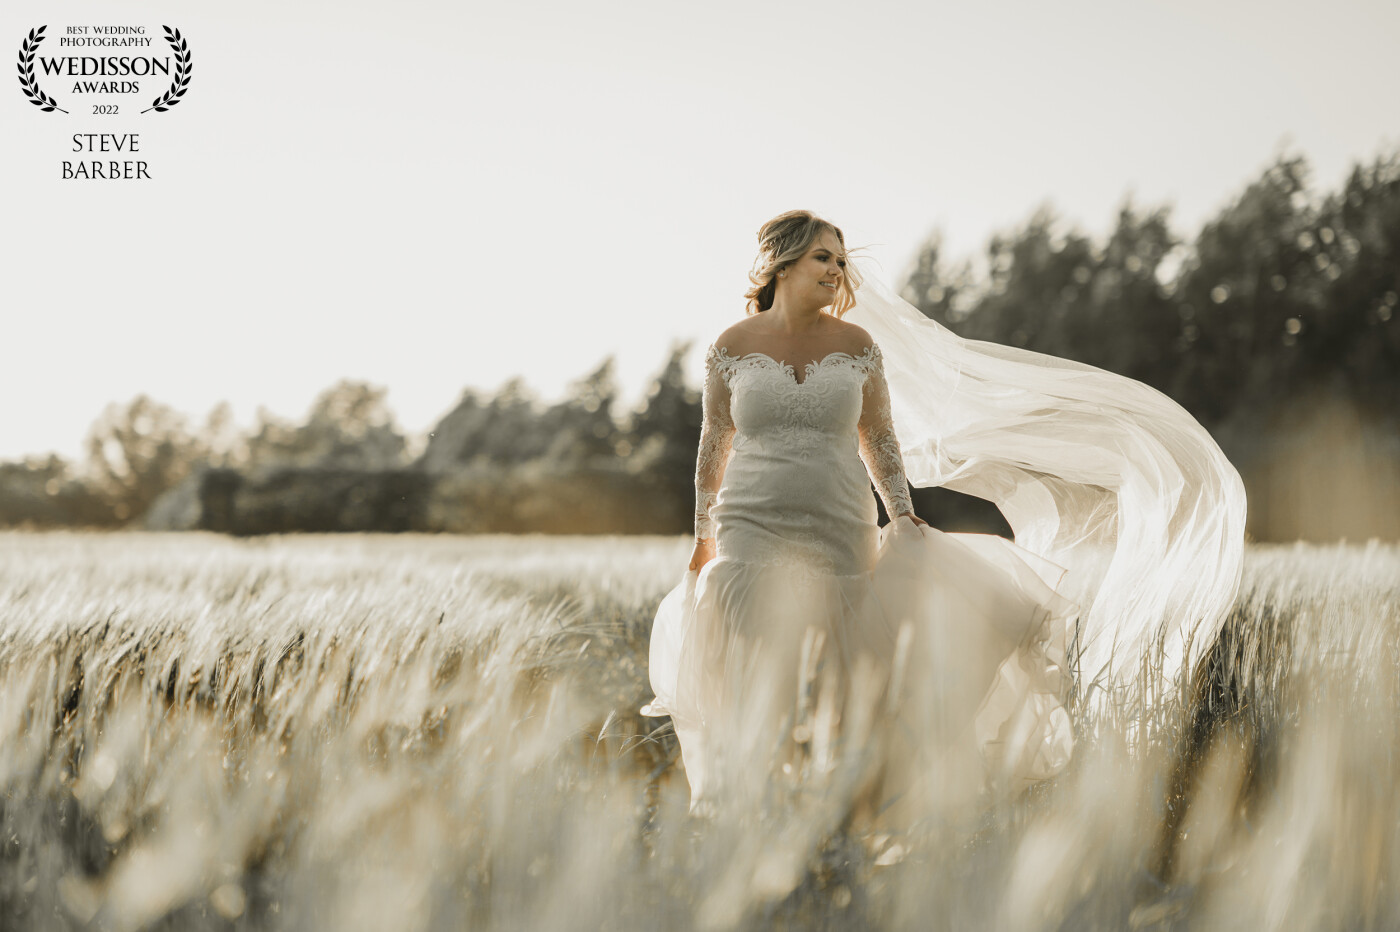 Golden hour always delivers! This shot was one of a few bridal portraits taken in that good light, I just happened to get lucky enough for a gust of wind to blow the veil to complete this image.